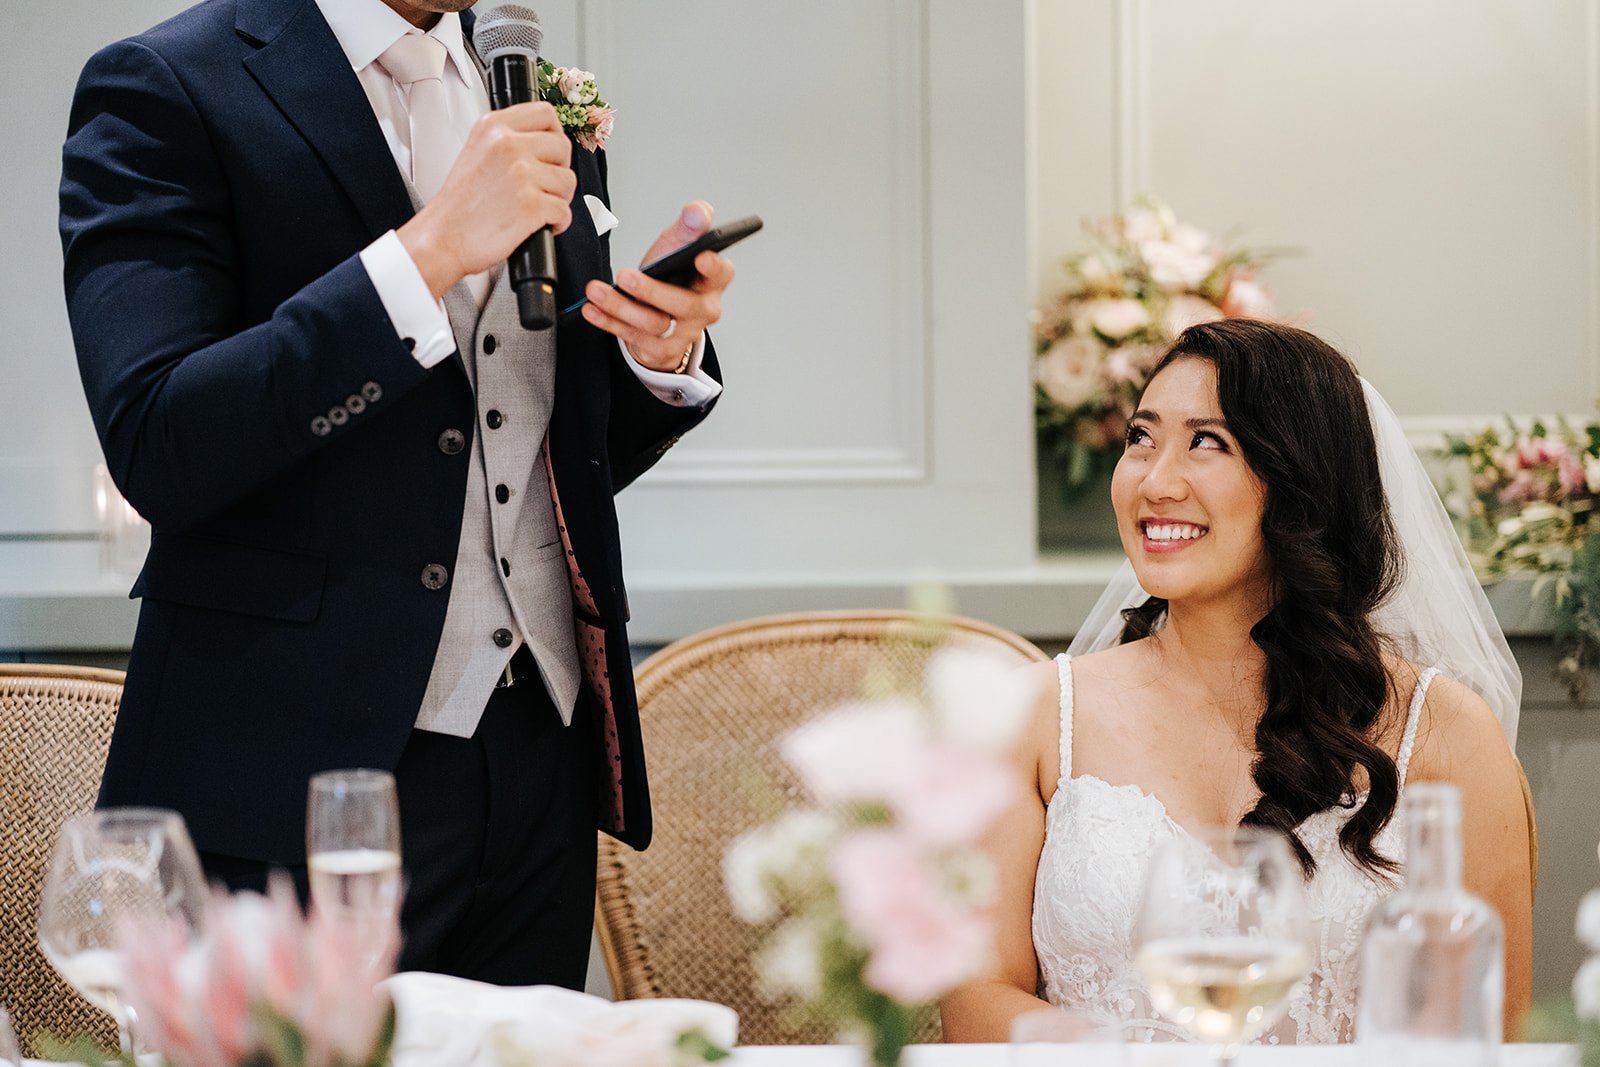 Groom, slightly cut out, delivers loving and romantic words to bride, sat down, during his wedding speech